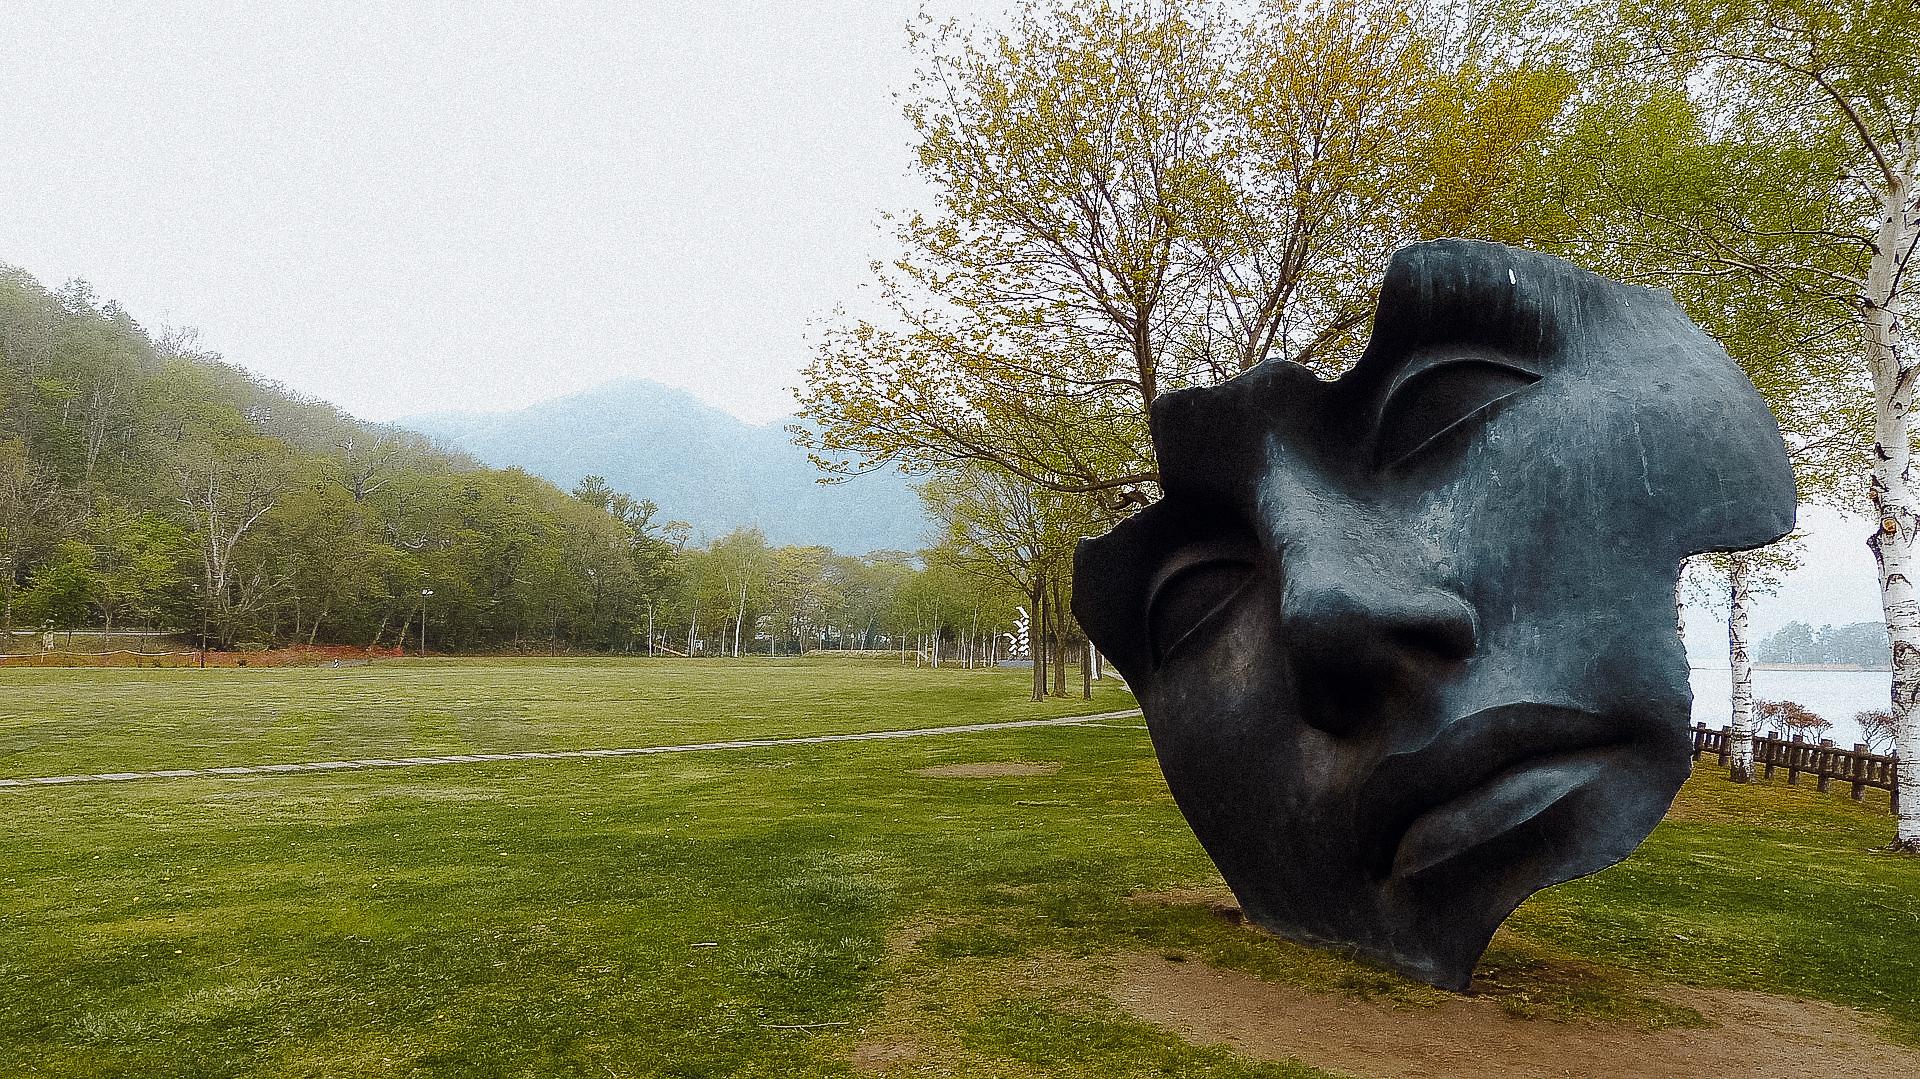 A scultpure of a giant face in a park next to Toya lake in Hokkaido in summer